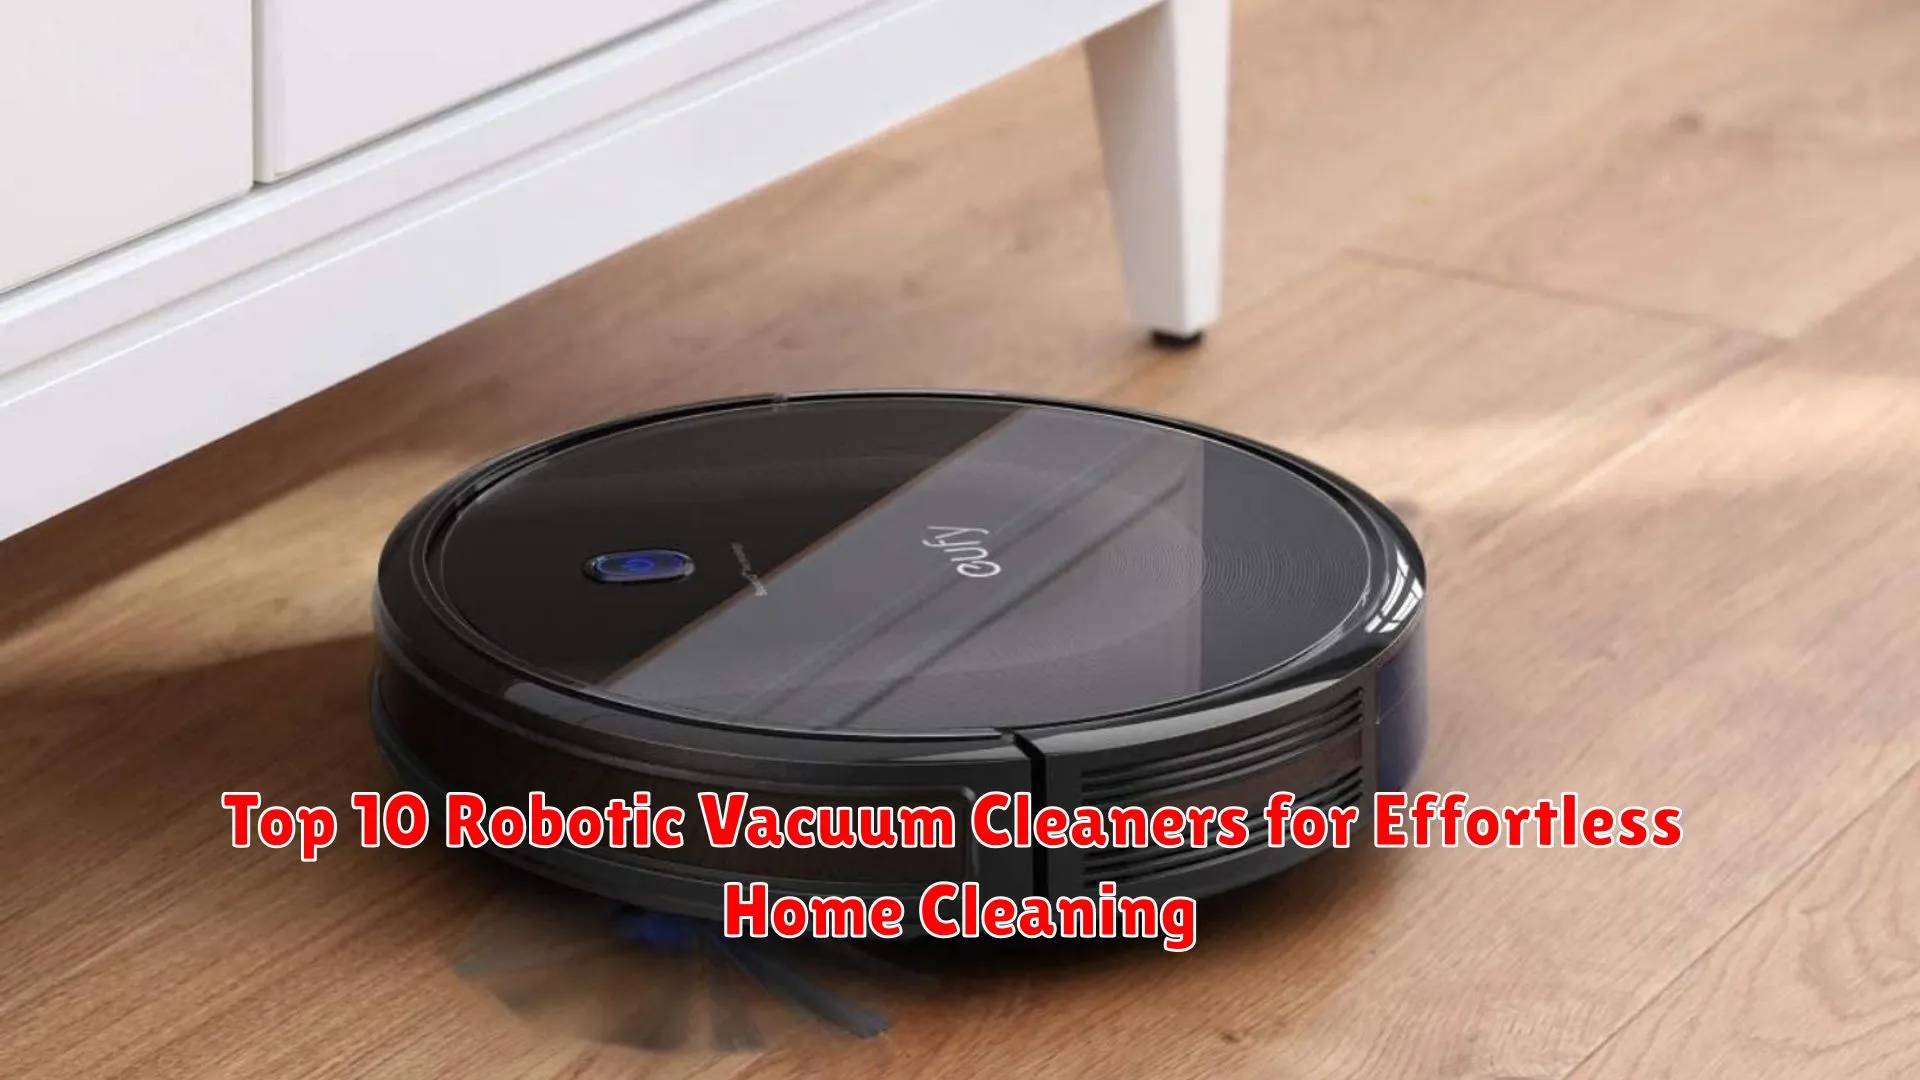 Top 10 Robotic Vacuum Cleaners for Effortless Home Cleaning